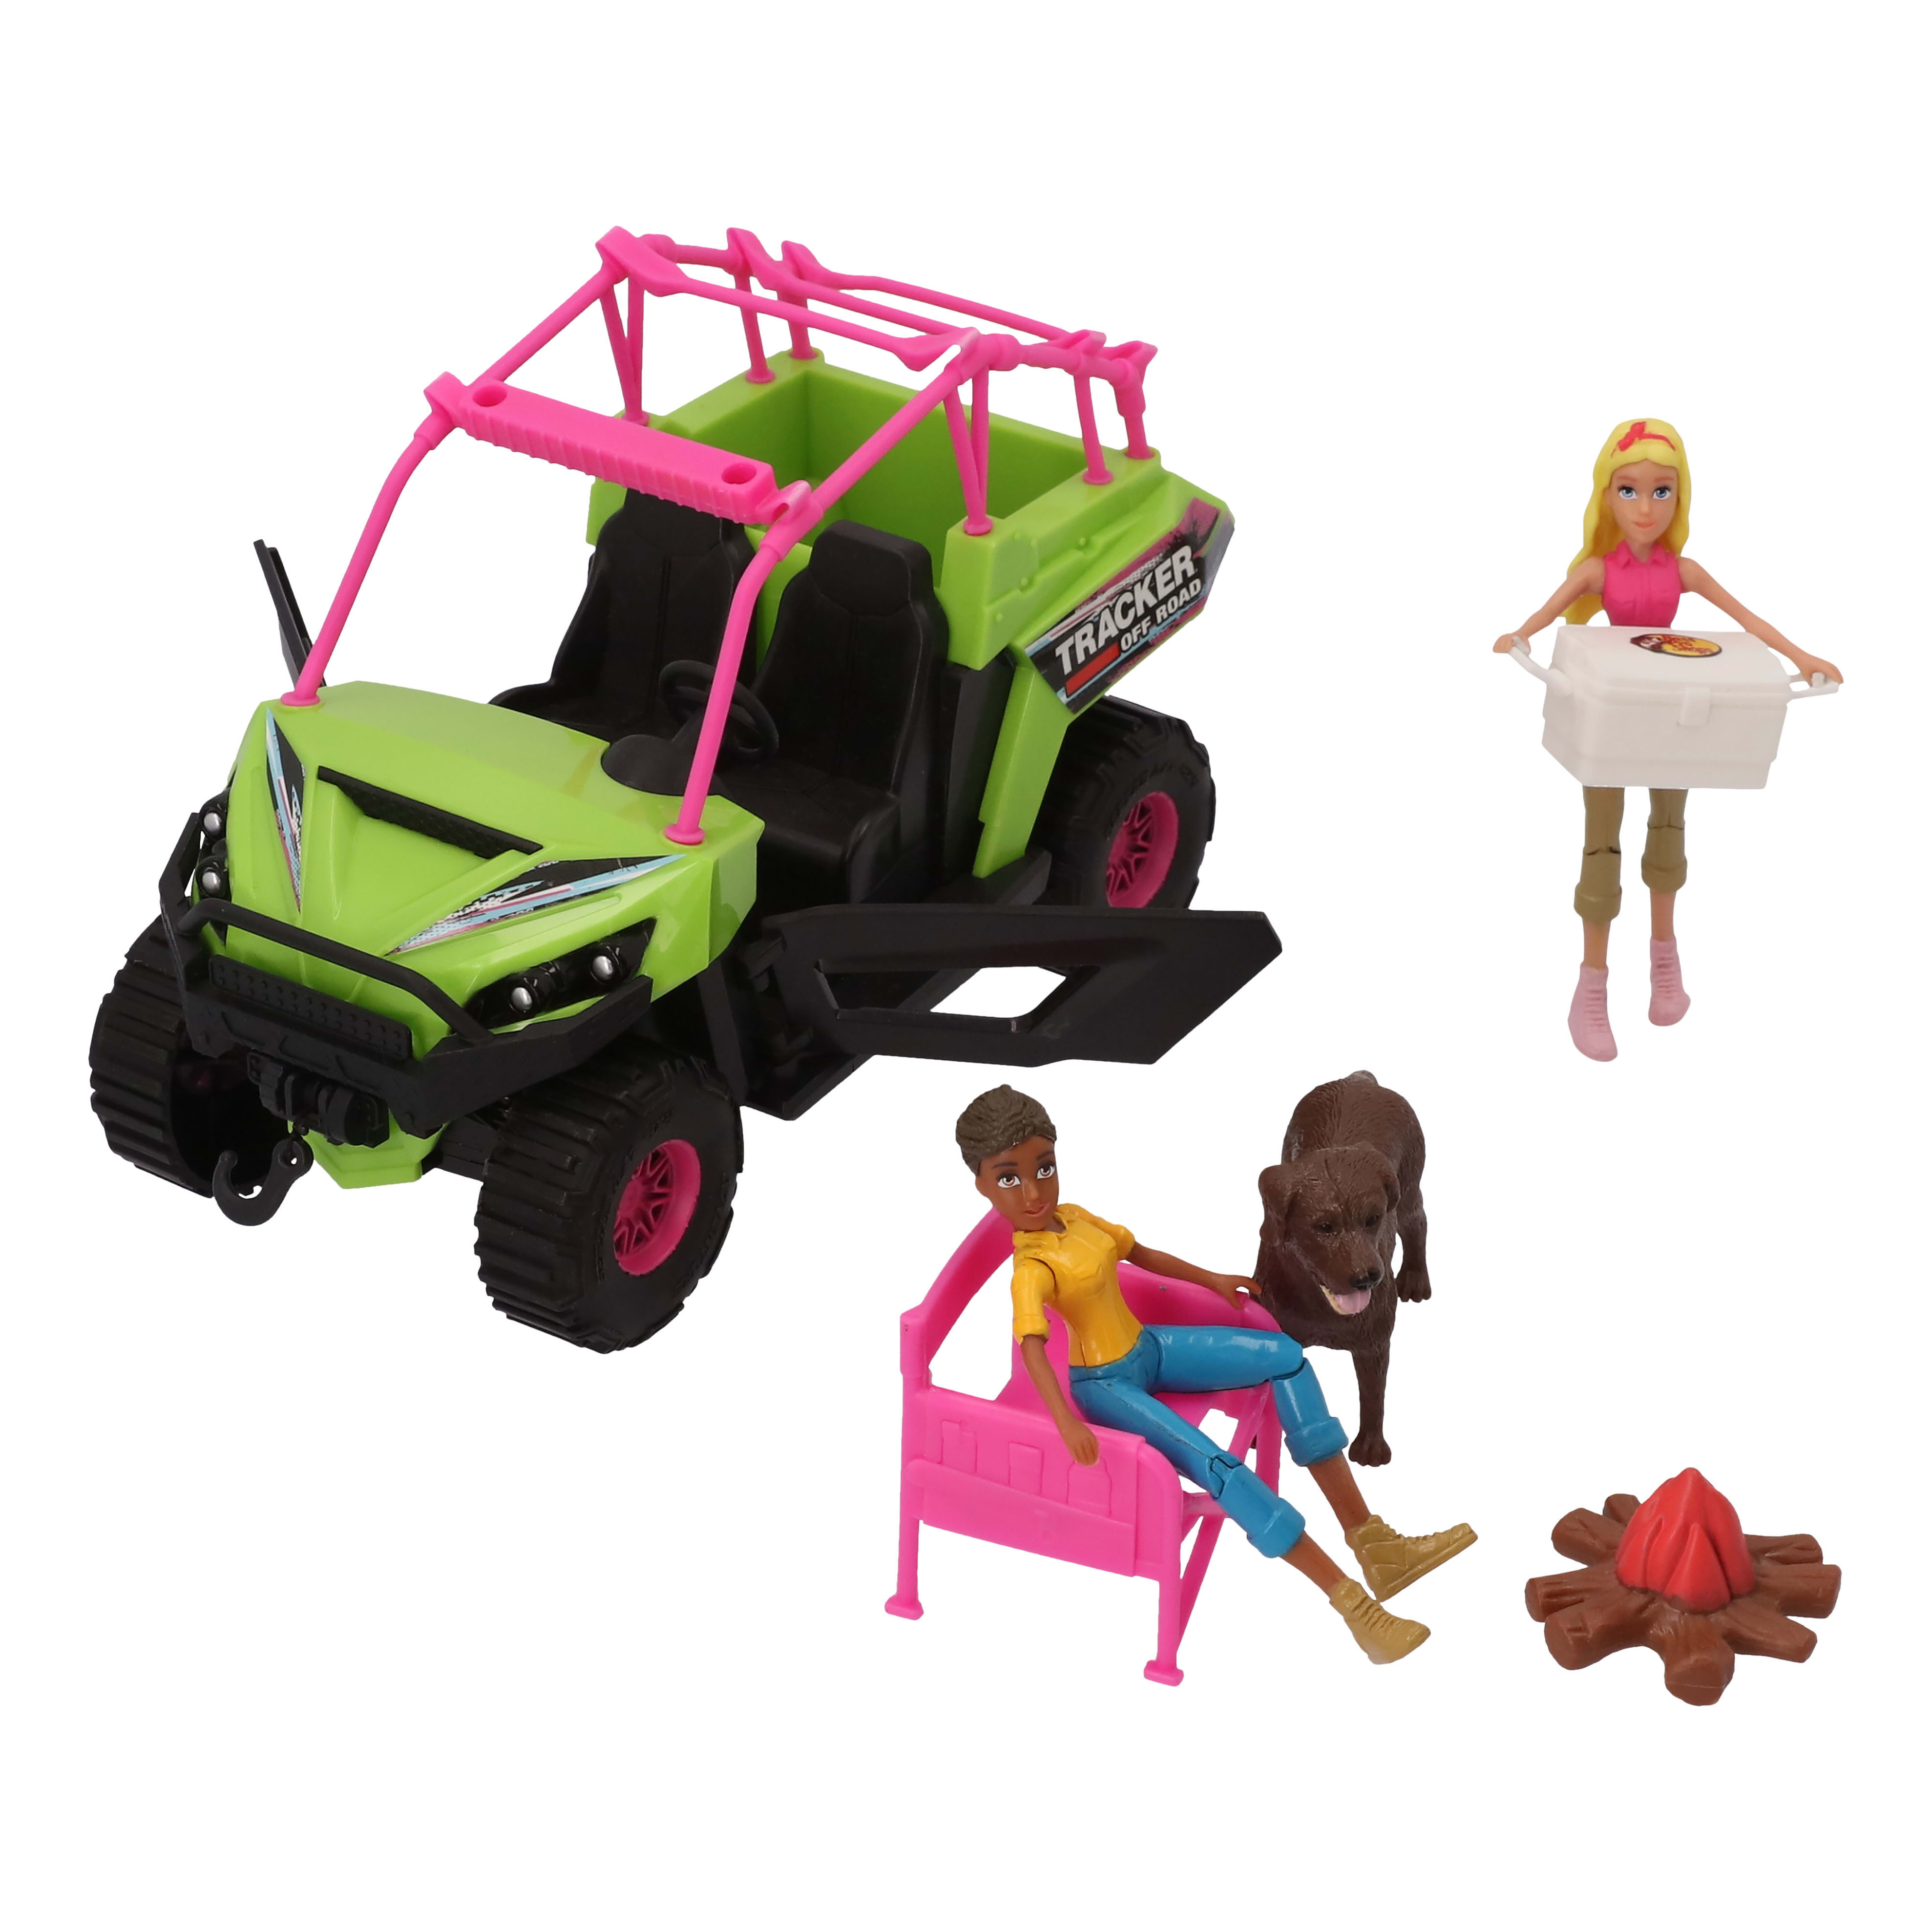 Bass Pro Shops® Her Imagination Adventure Side-by-Side Play Set